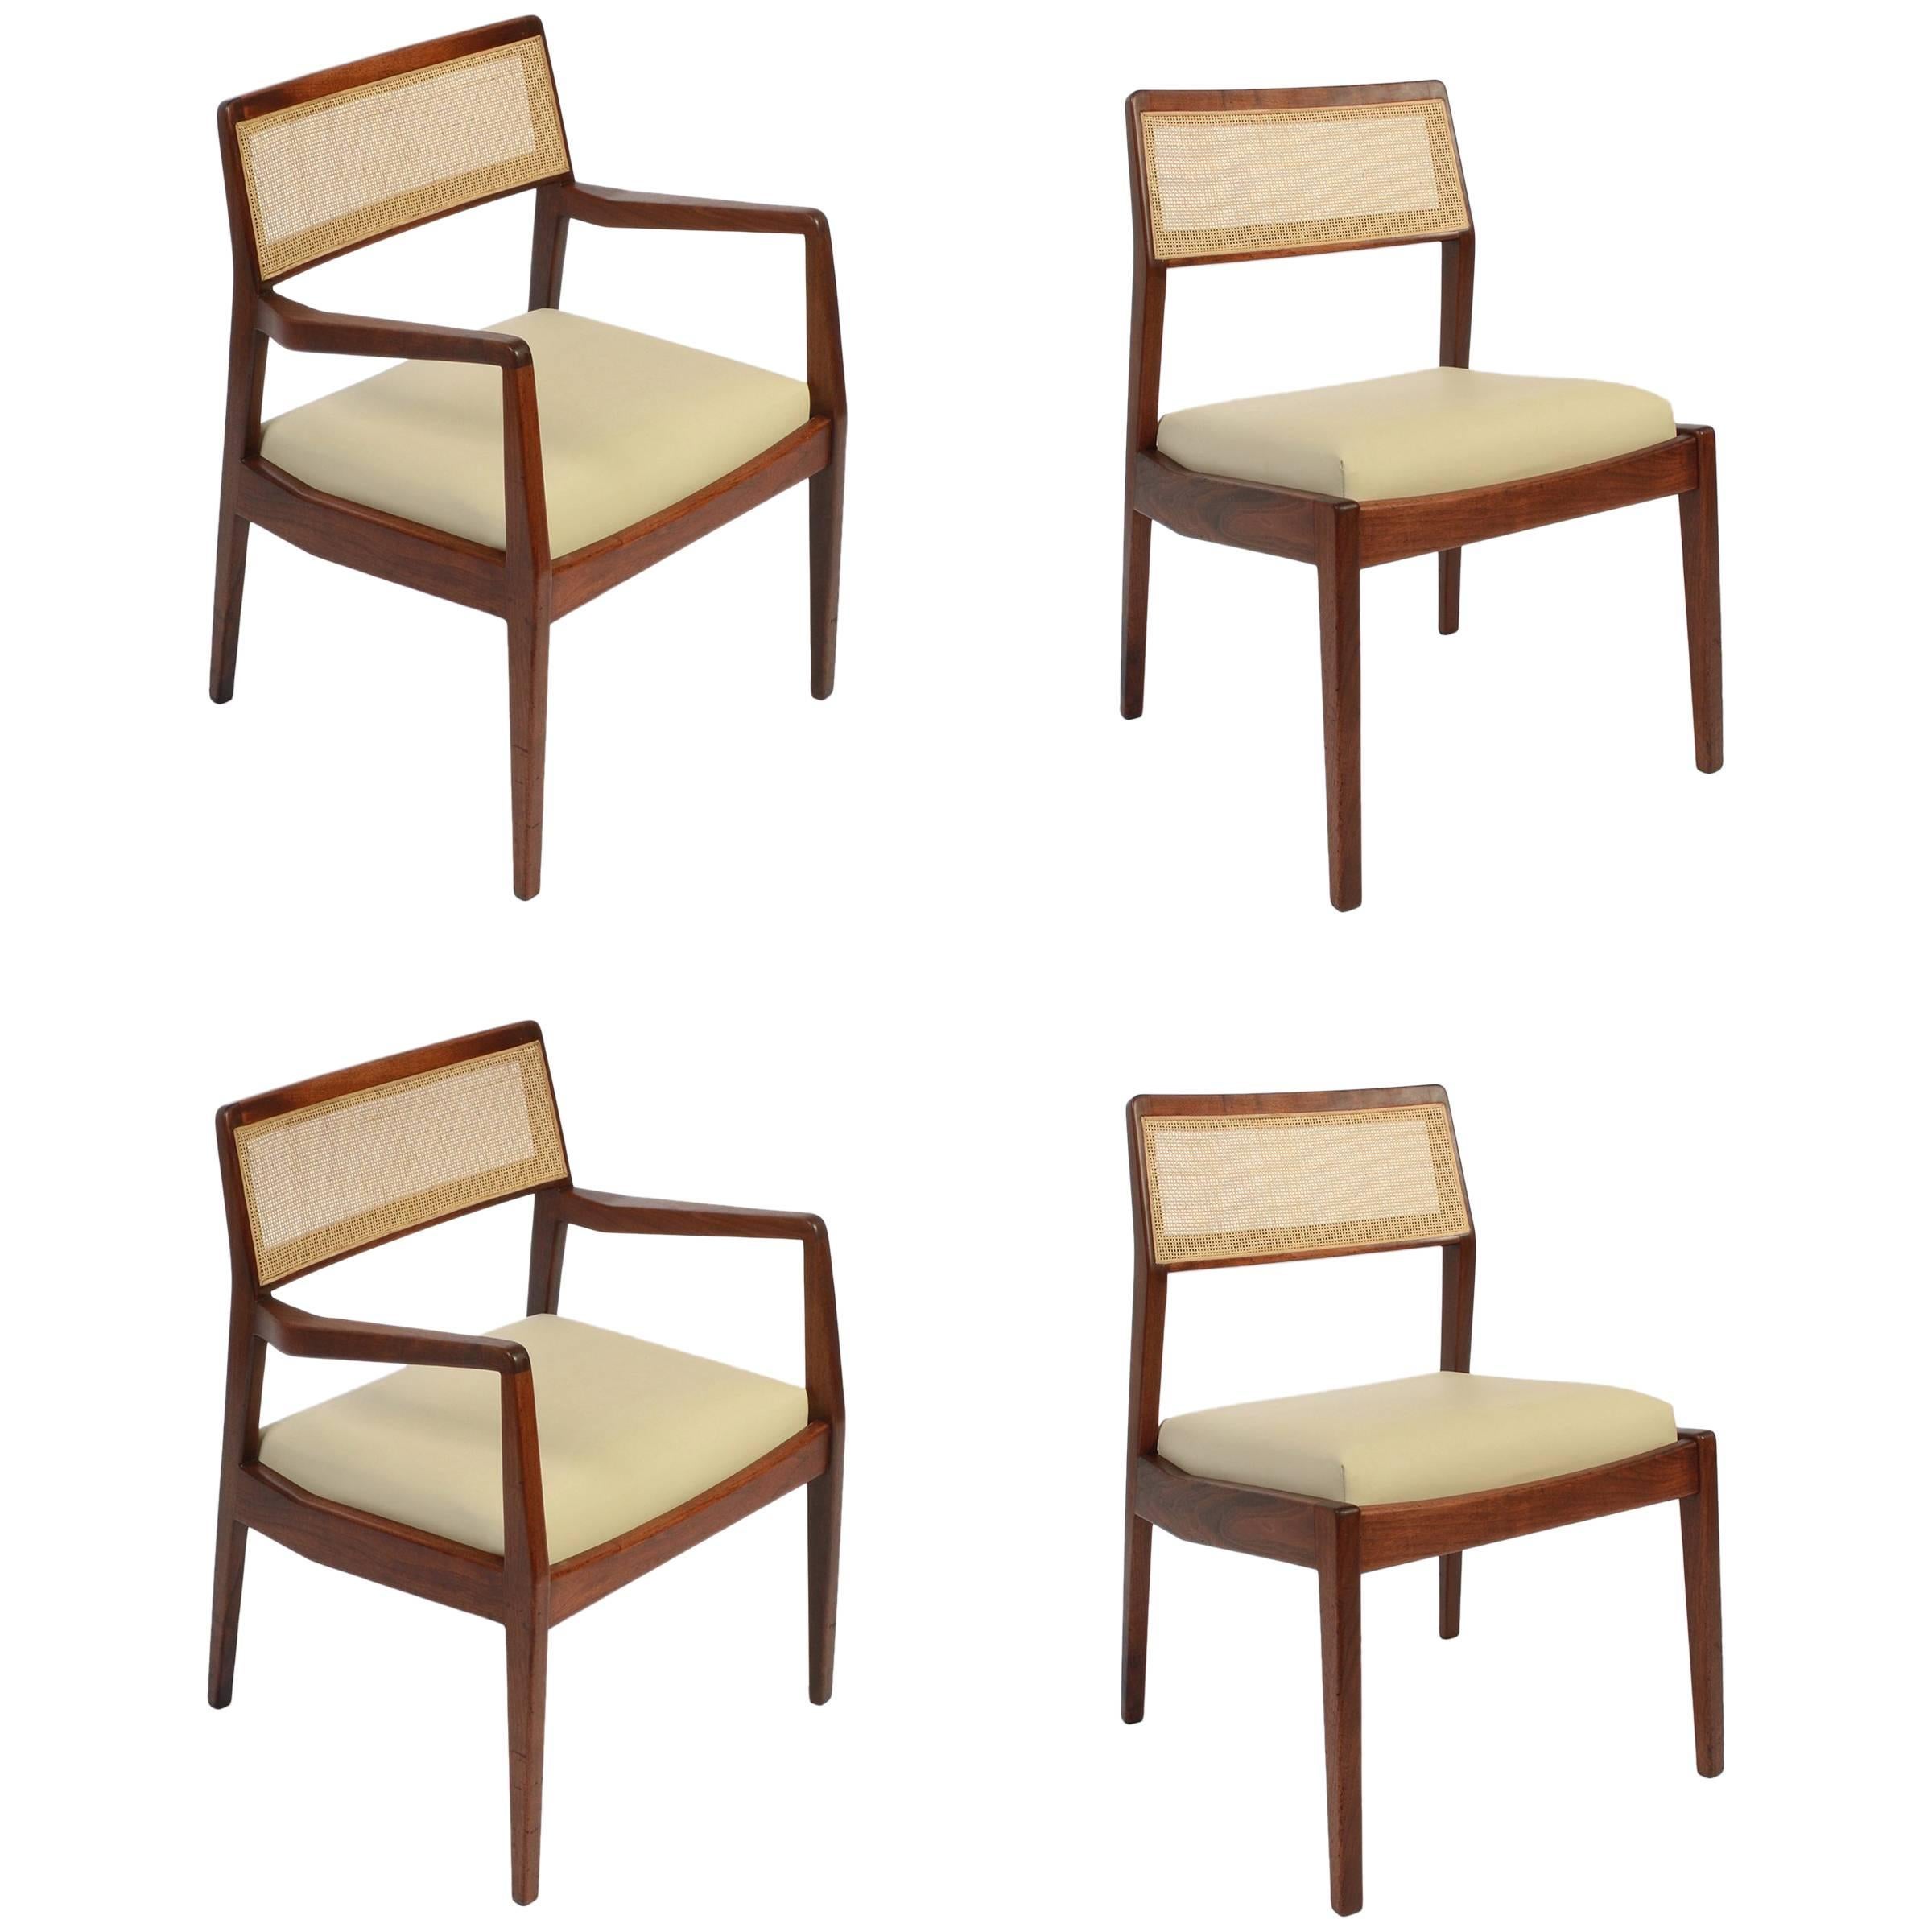 Set of Four Jens Risom "Playboy" Chairs in Walnut, Cane and Leather